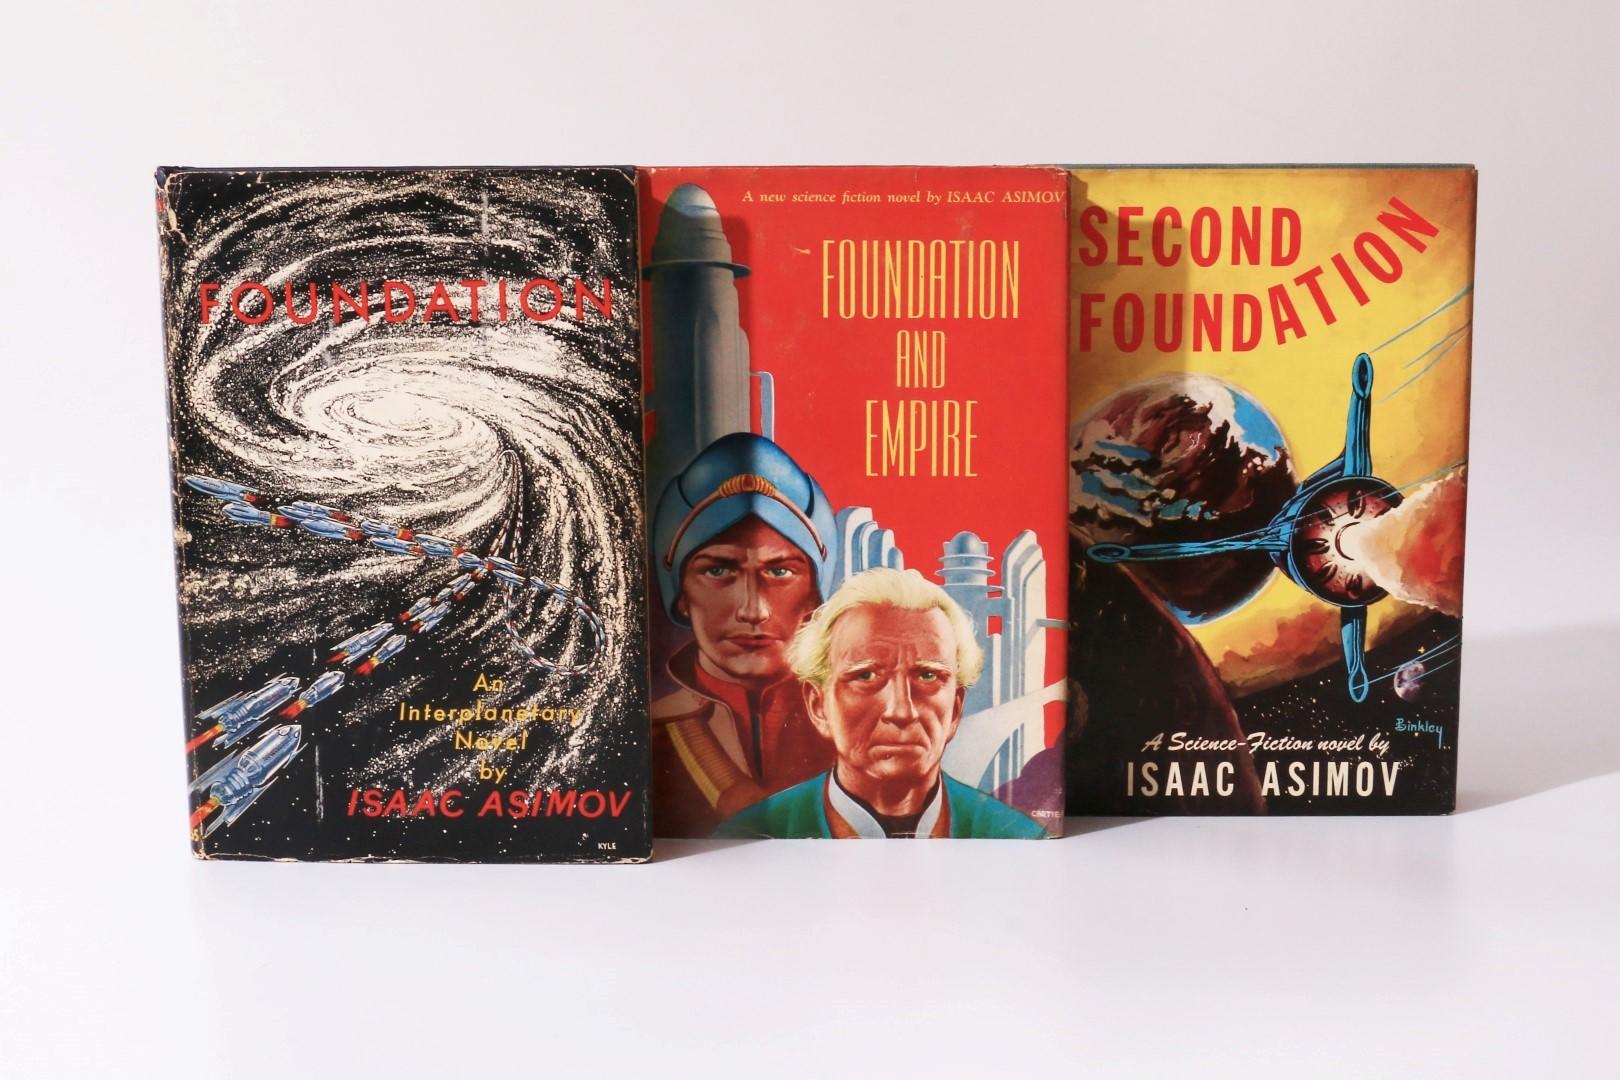 Isaac Asimov - The Foundation Trilogy [comprising] Foundation, Foundation & Empire, and Second Foundation - Gnome Press, 1951-1953, First Edition.